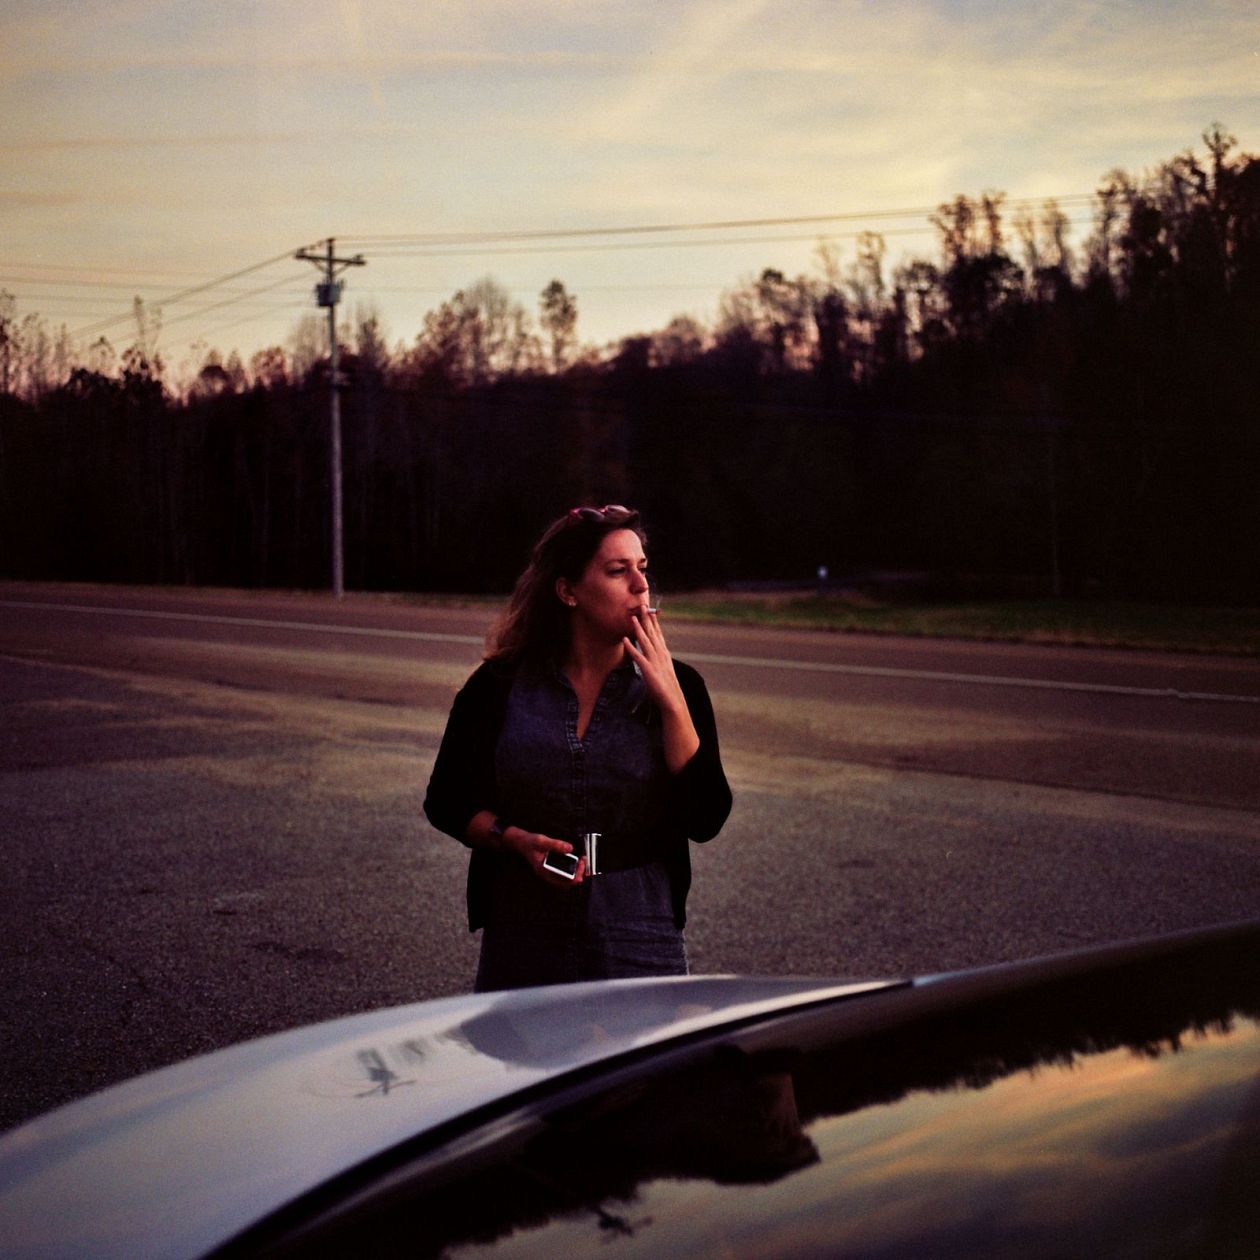 woman with mobile phone in the car on the road at sunset